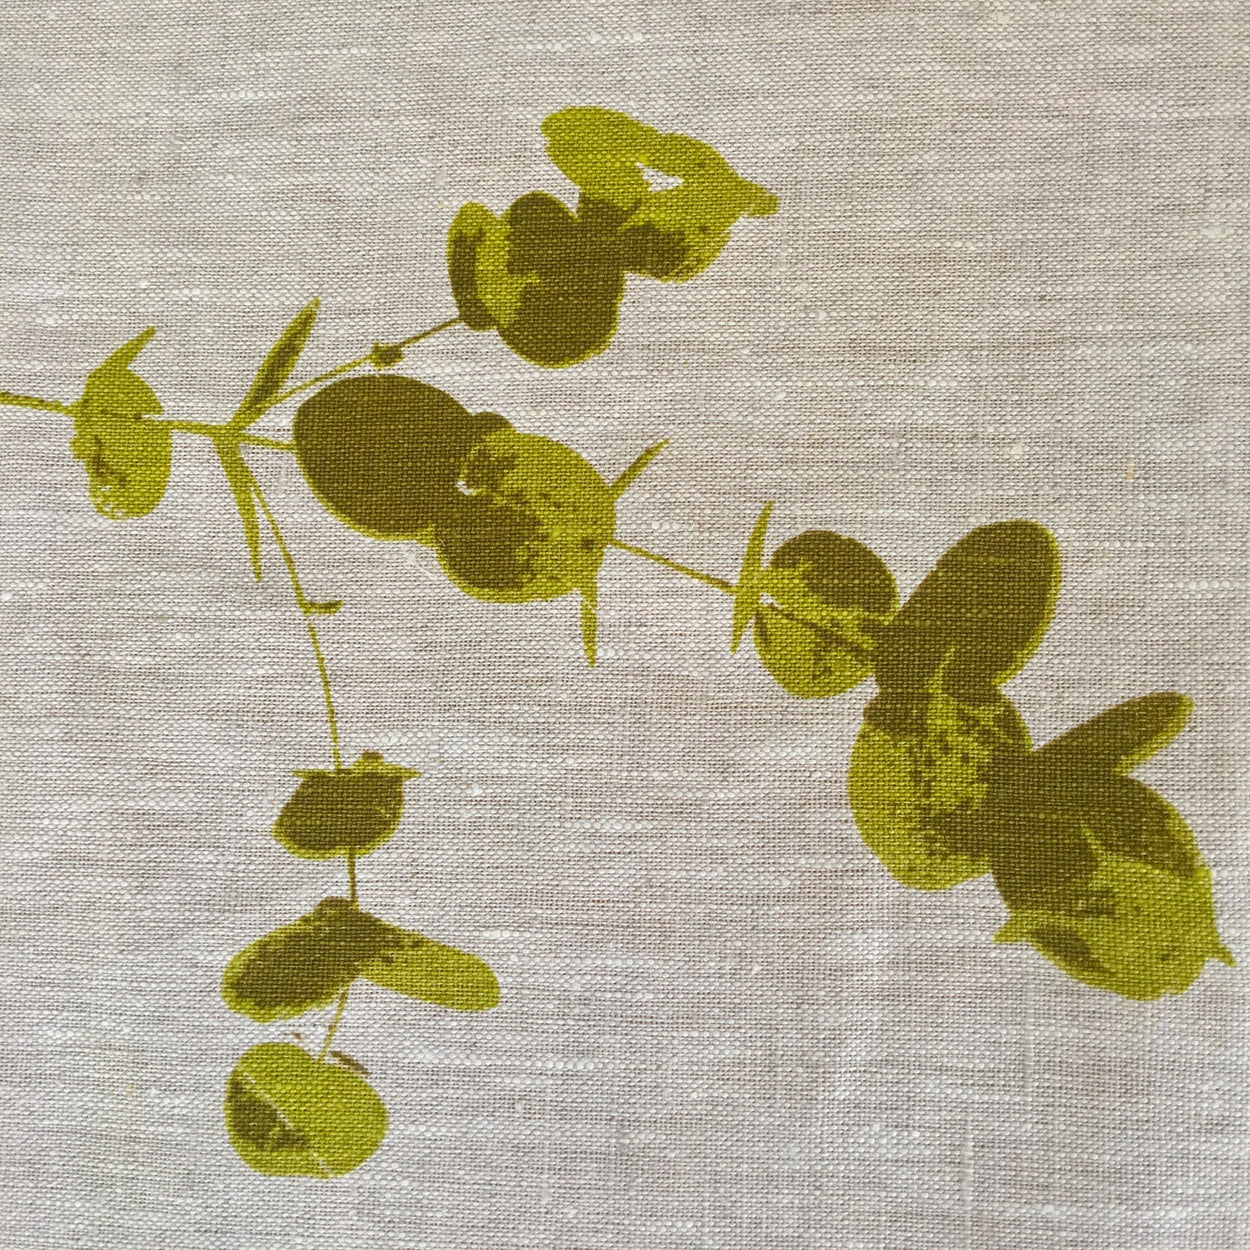 Baby gumleaves tablecloth